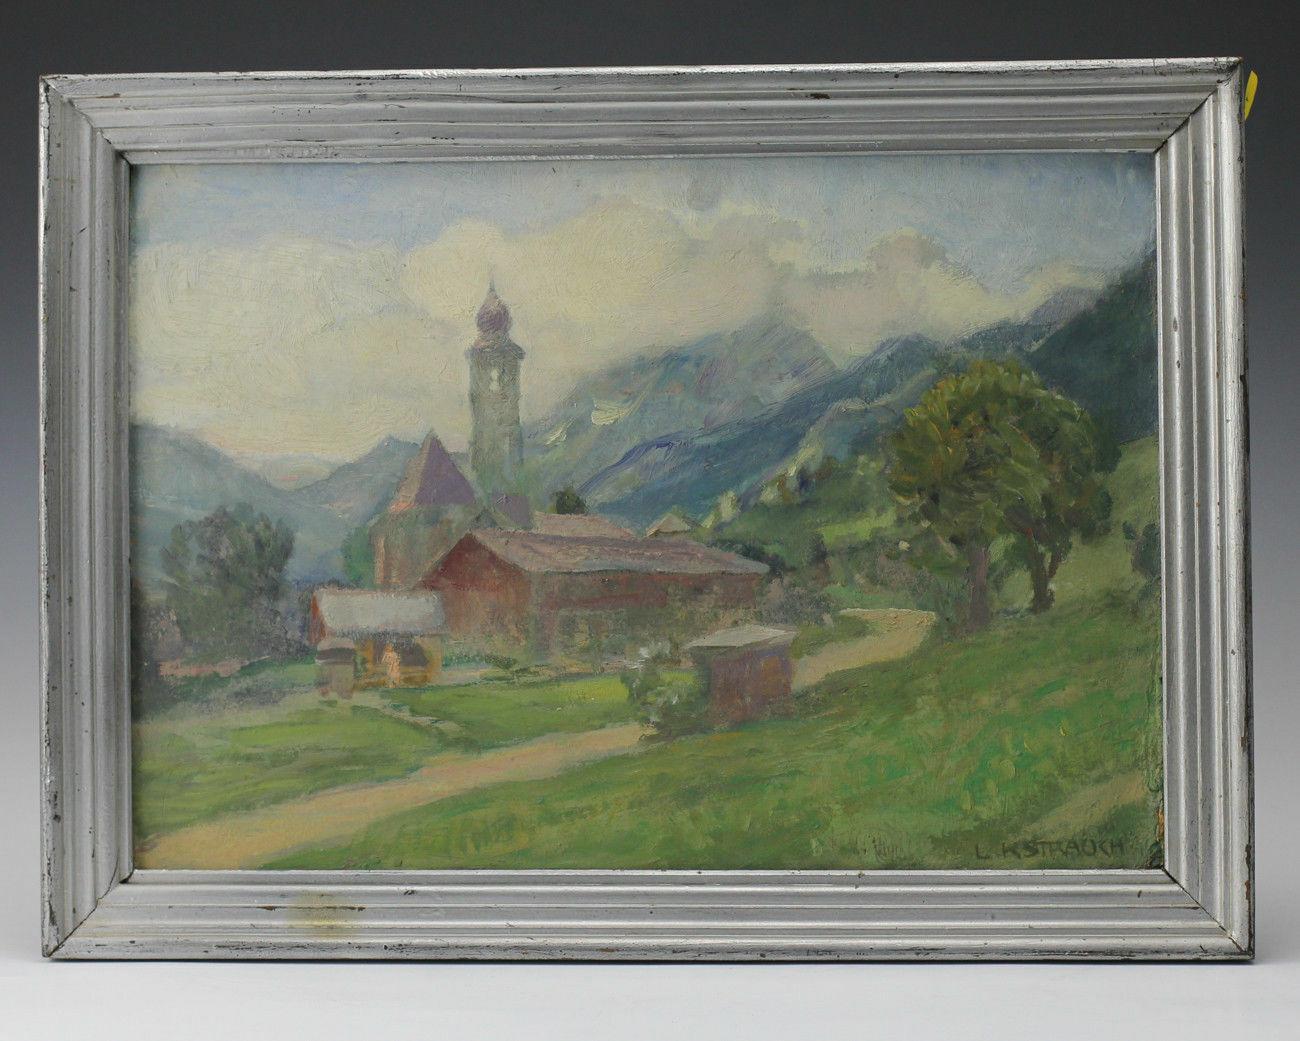 Ludwig Karl strauch oil painting church and landscape.

Strauch, Ludwig Karl (Austrian, 1875-1959) oil on board the painting of a church with mountain landscape signed L. K. Strauch (lower right).

Additional Information:
Production Technique: